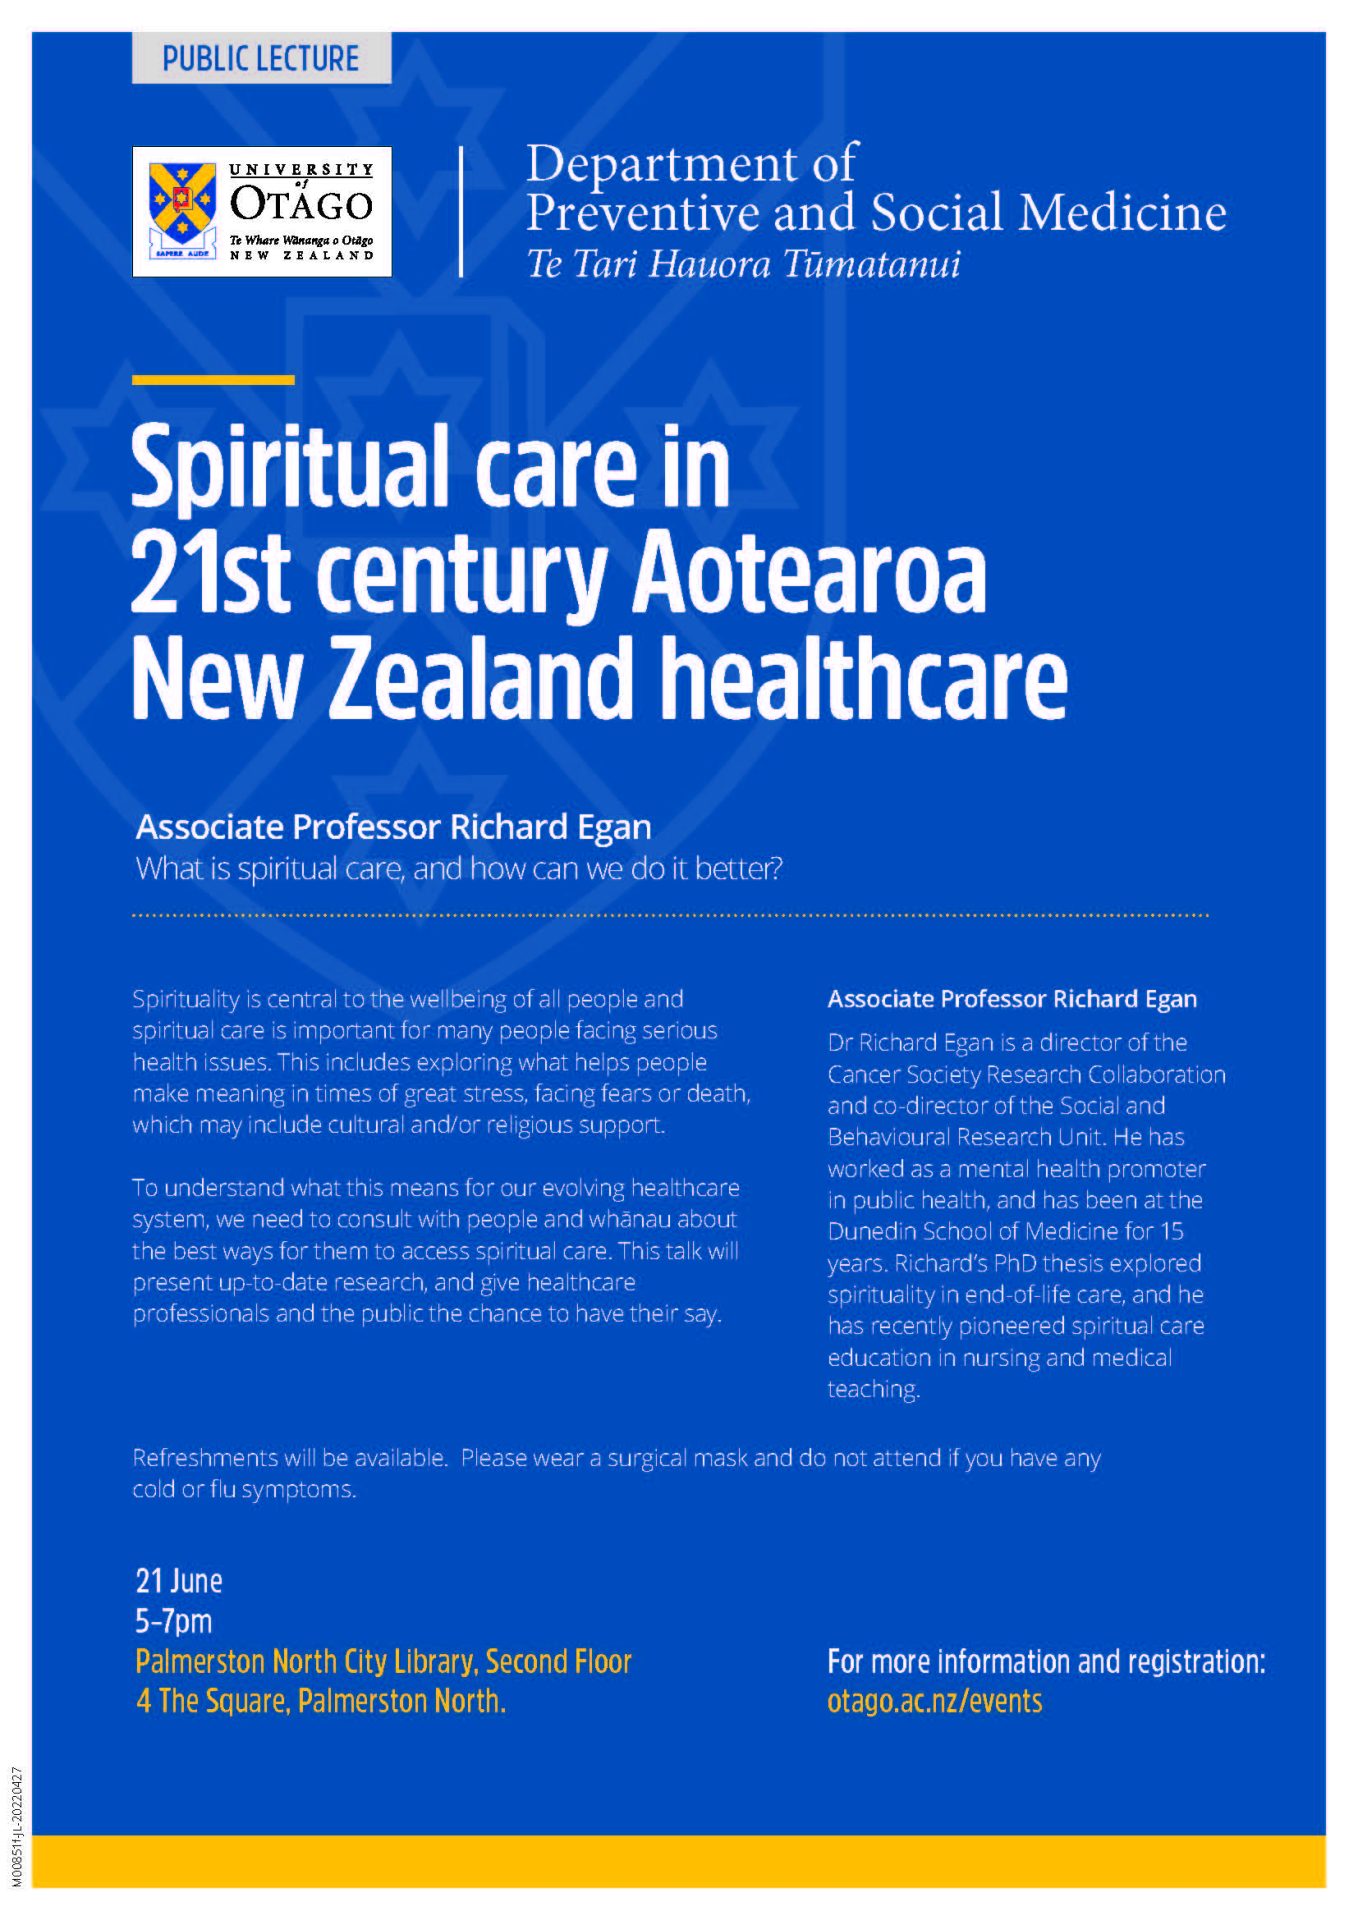 Presentation by Assoc. Professor Richard Egan at Palmerston North Library June 21st from 5-7 pm